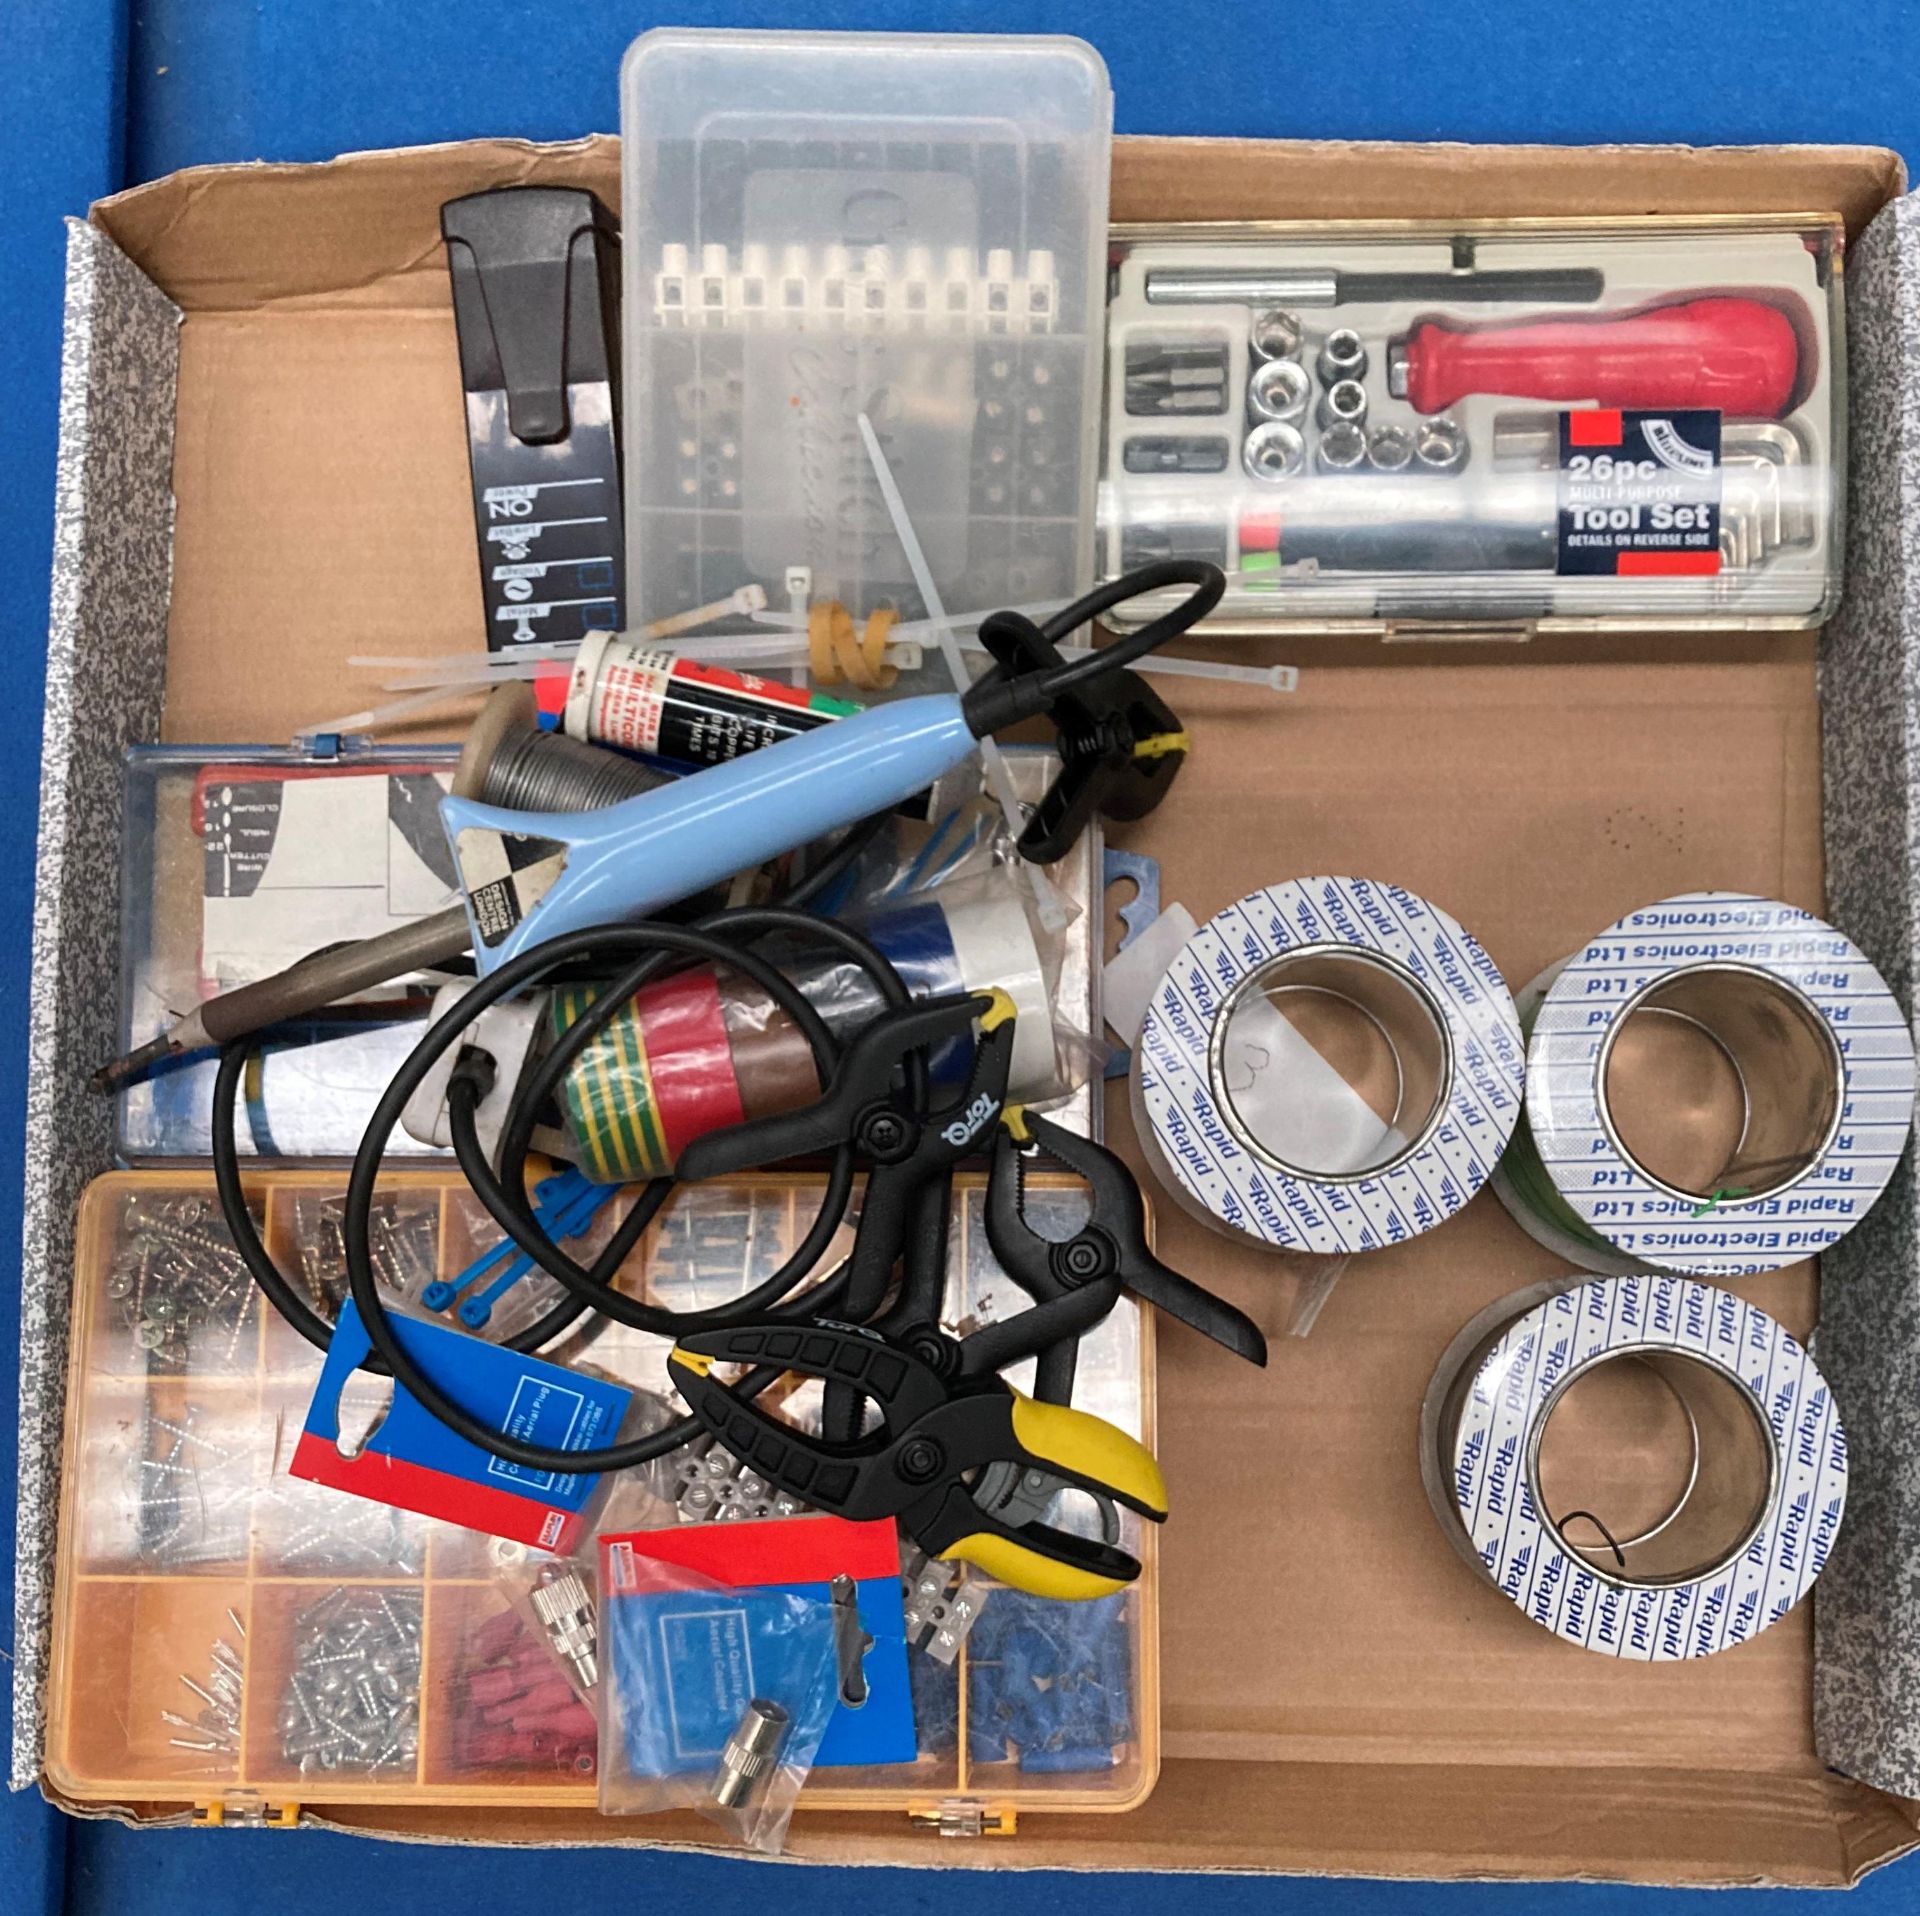 Contents to tray - model makers tools and accessories including a Dremel multi drill with - Image 3 of 3